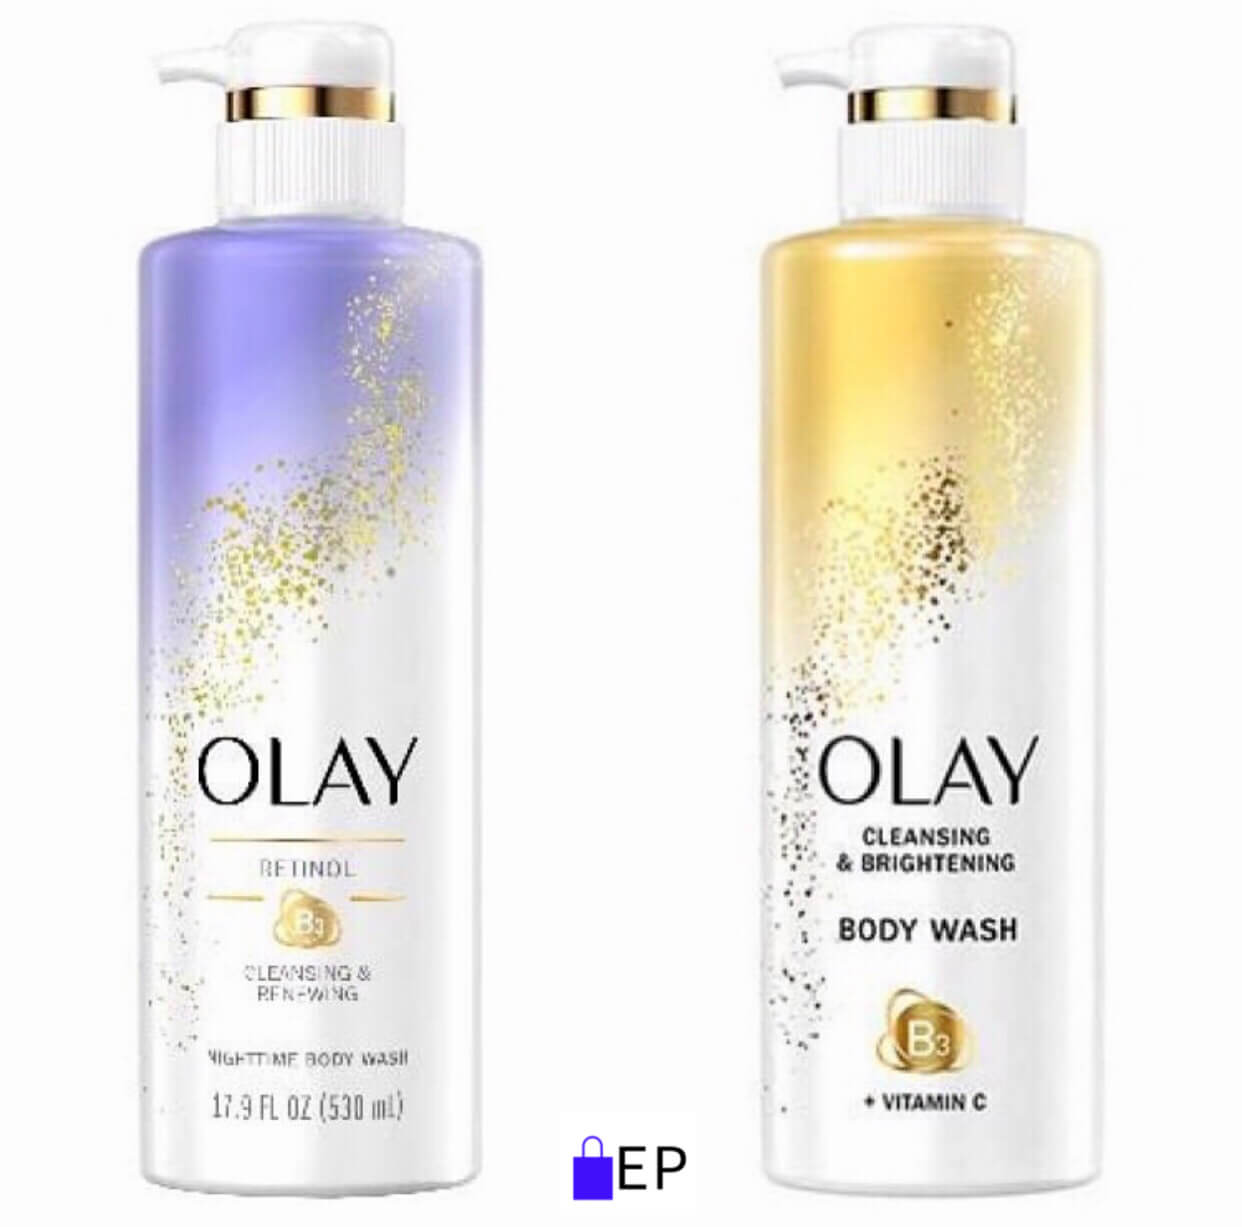 10 Olay Body Wash Products Under $20 That Reviewers Love